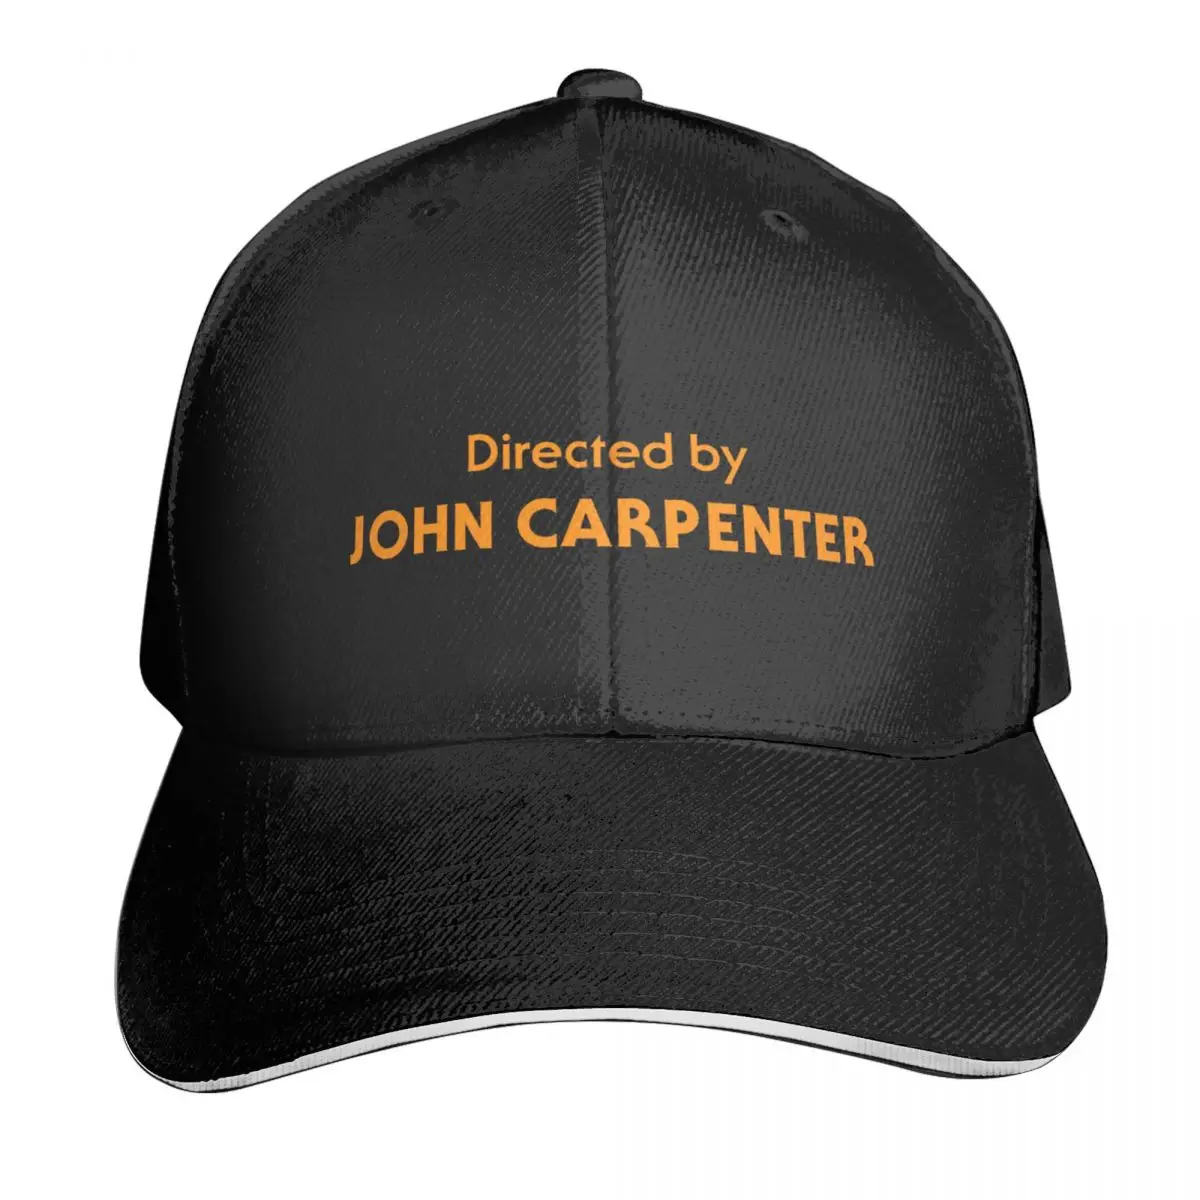 

Halloween Directed By John Carpenter Casquette, Polyester Cap Trendy Wicking Curved Brim